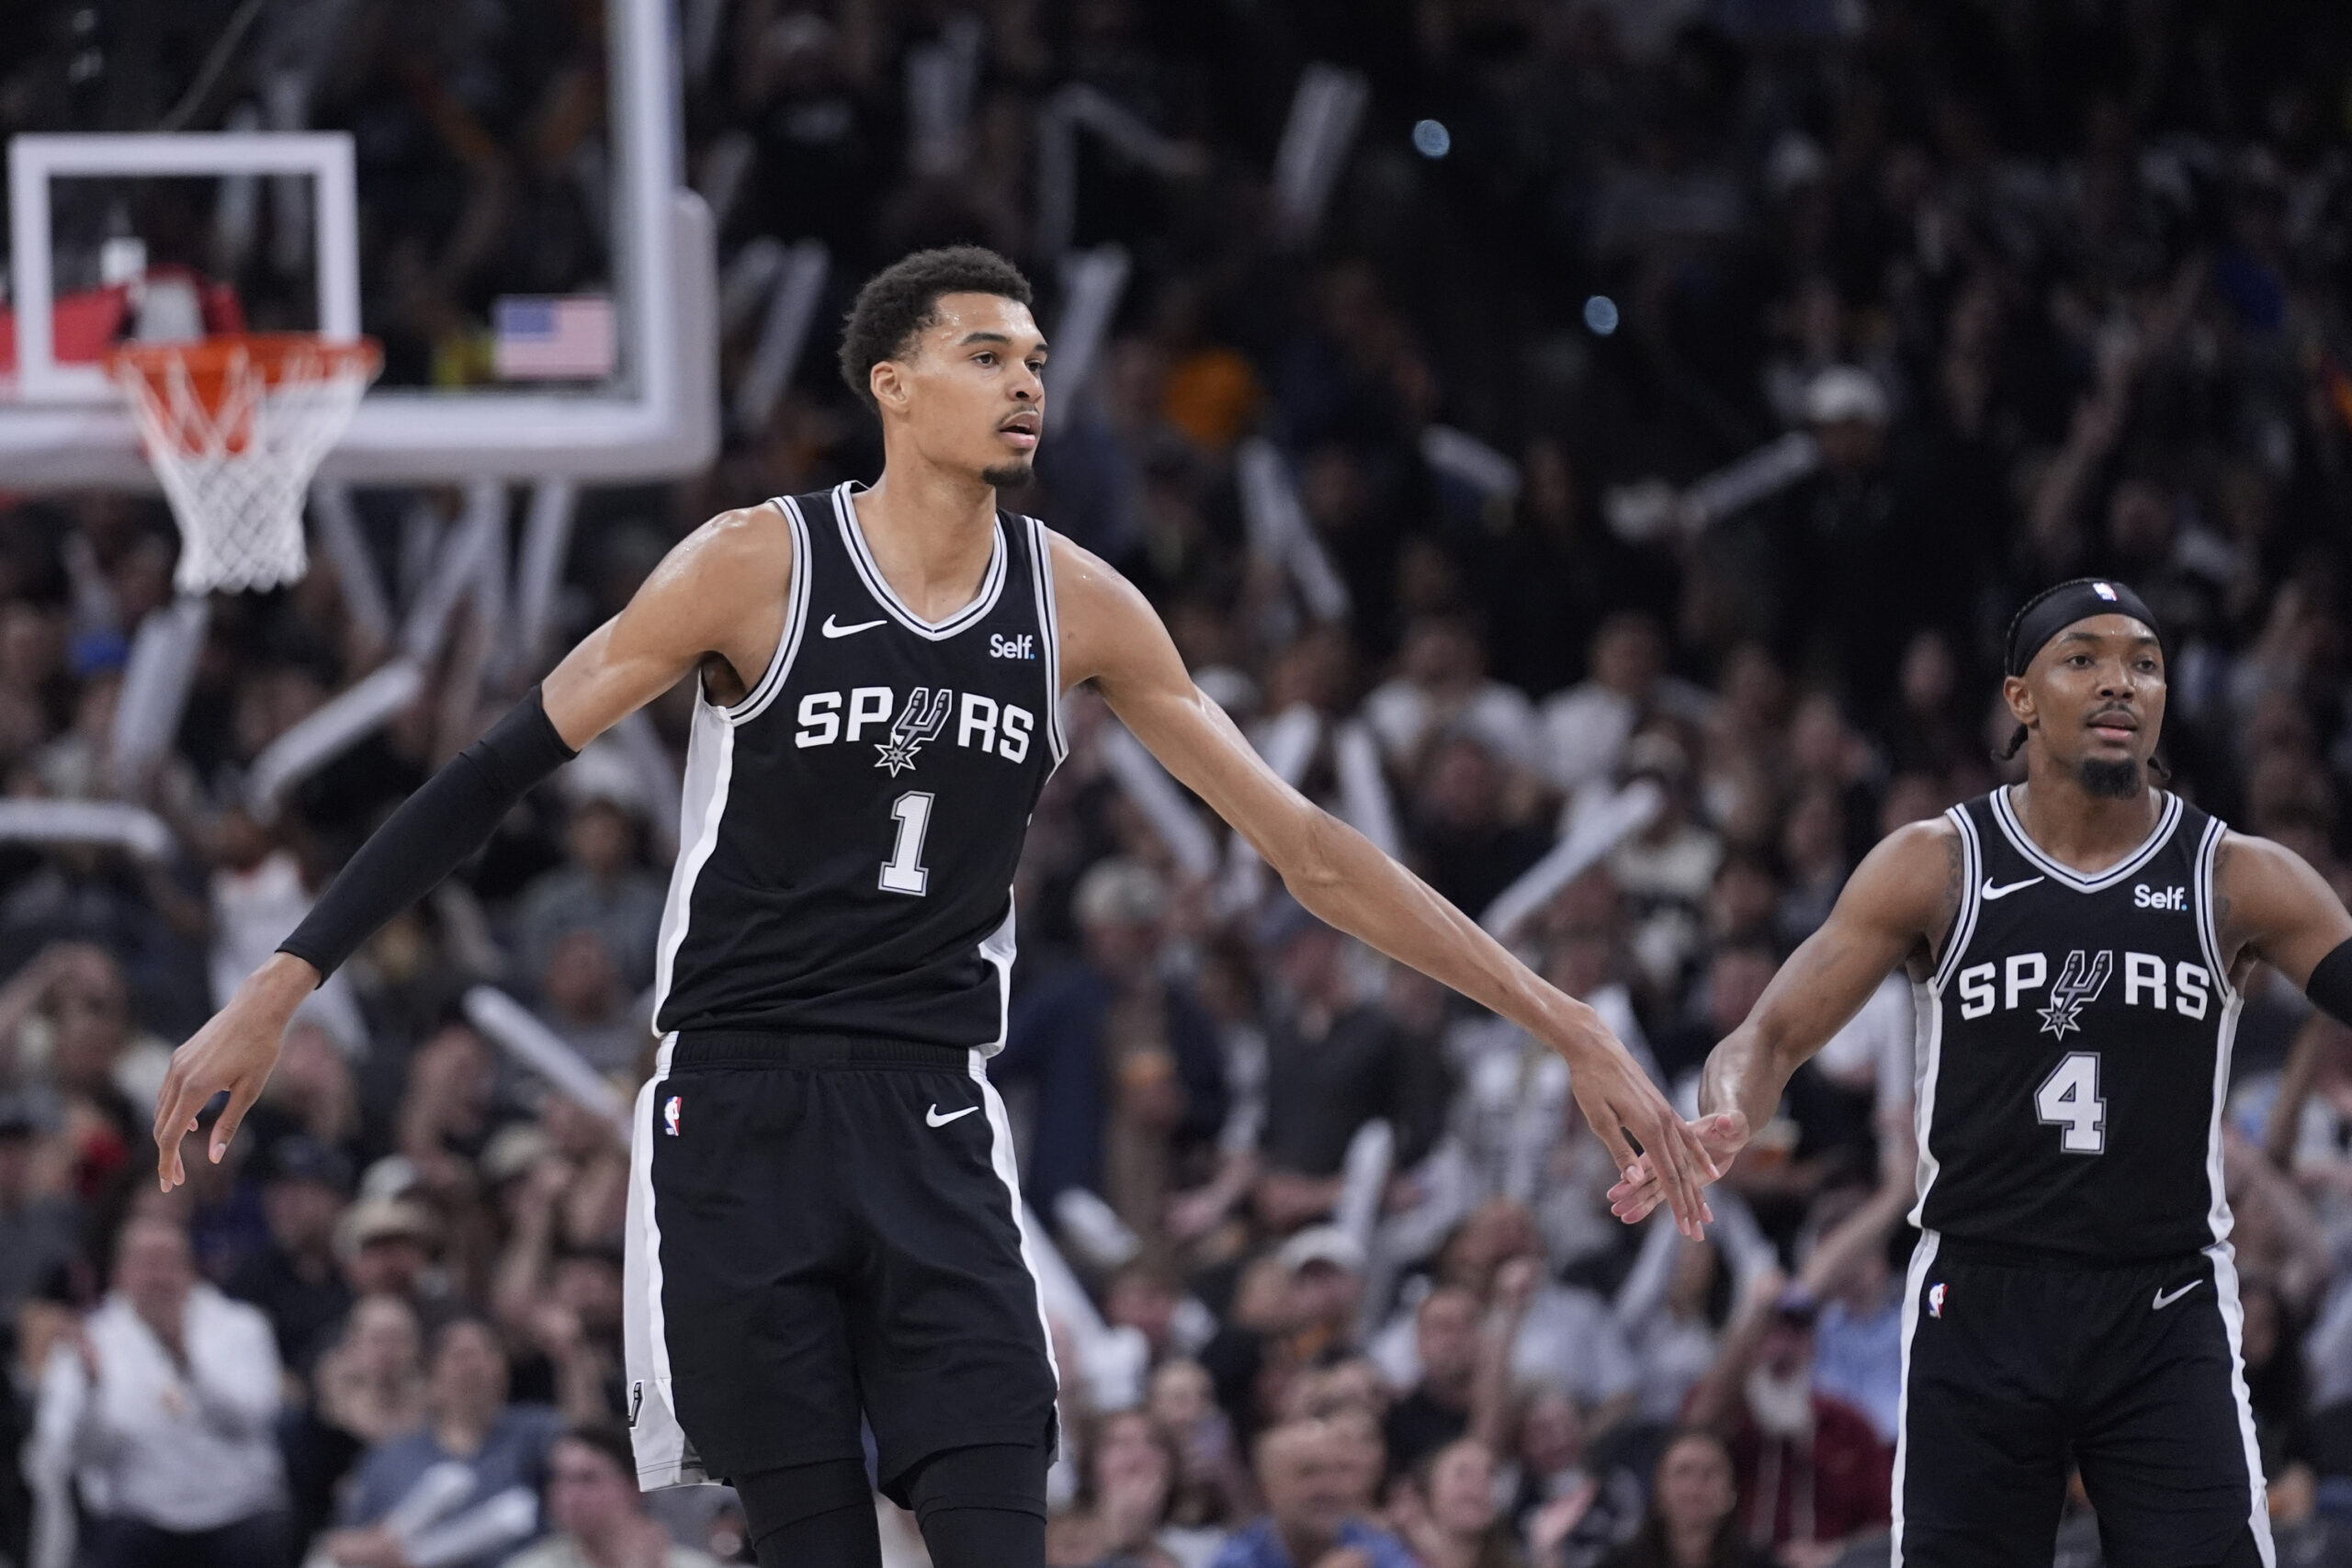 nba: wembanyama rookie season is over, out on spurs’ finale